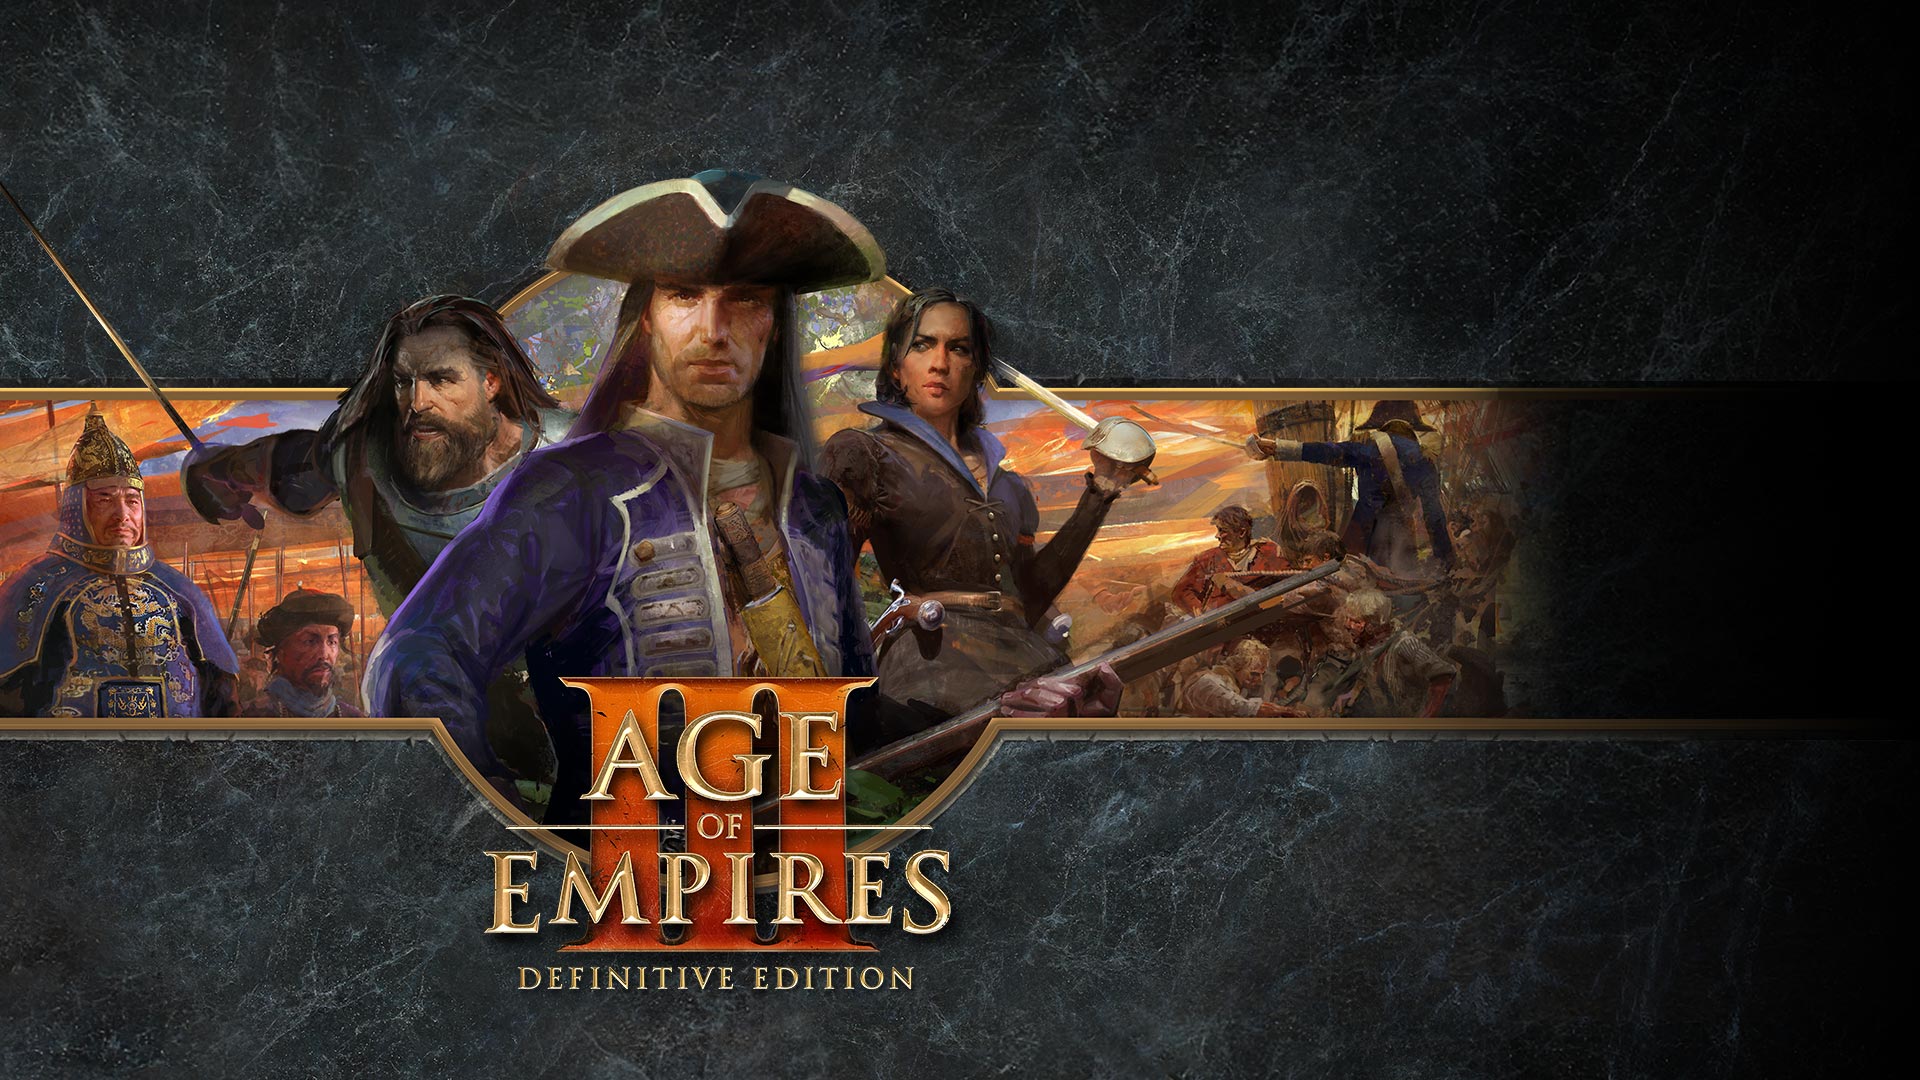 Age of Empires III: Definitive Edition, characters posing